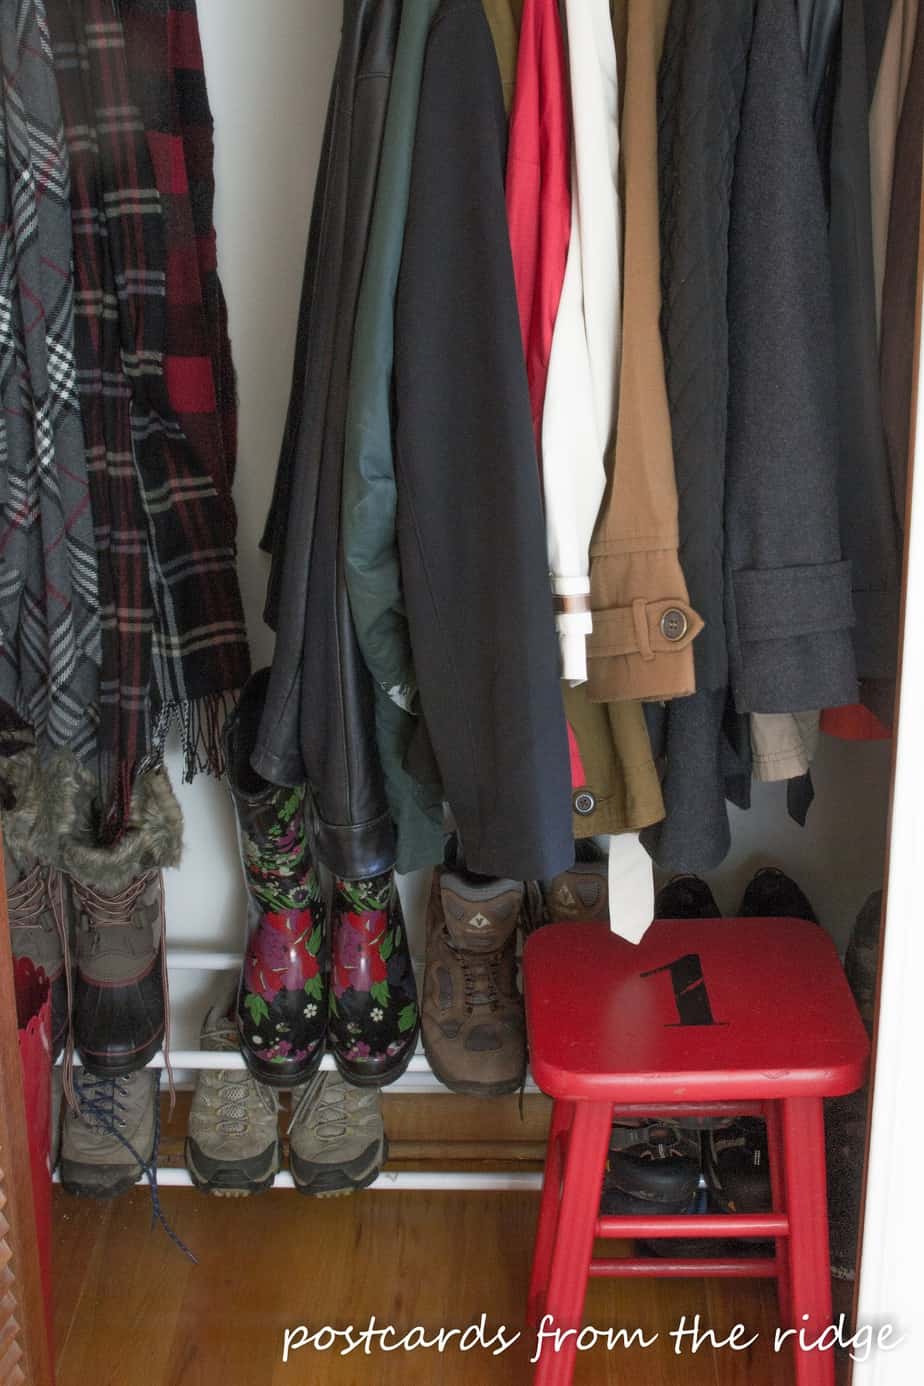 Add a stool to the coat closet. Lots of other great ideas here.